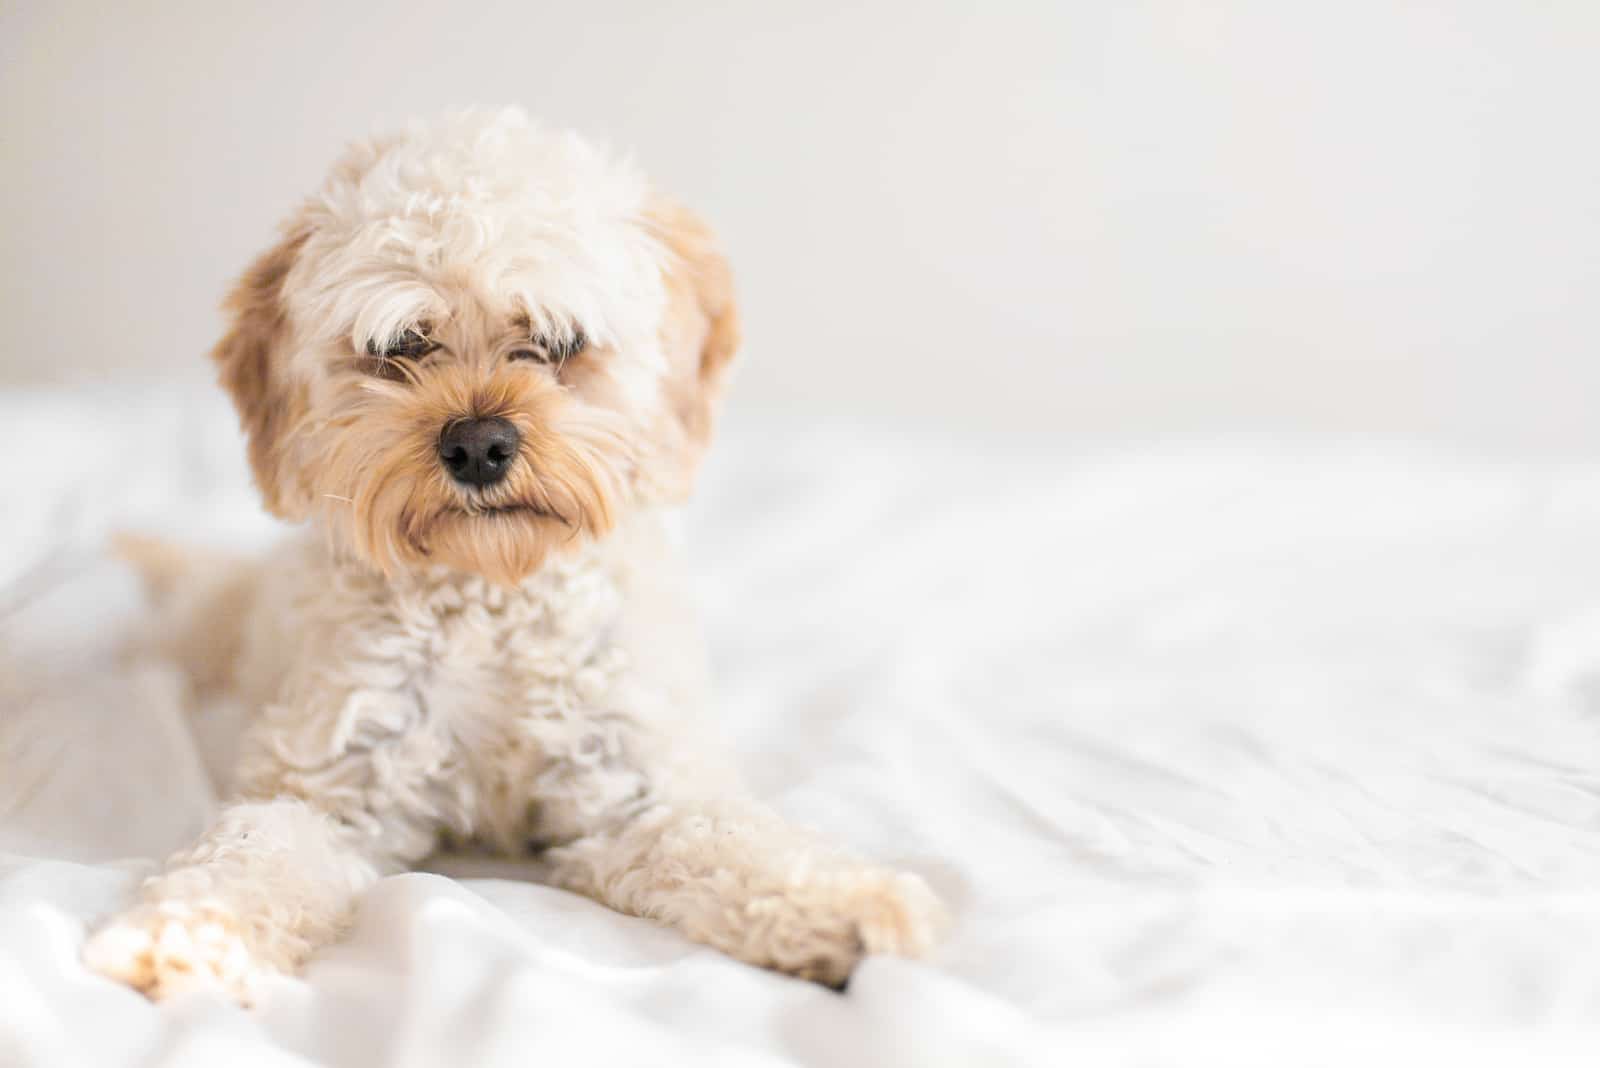 8 Best Cavapoo Haircuts For Your Dog + The Grooming Tips